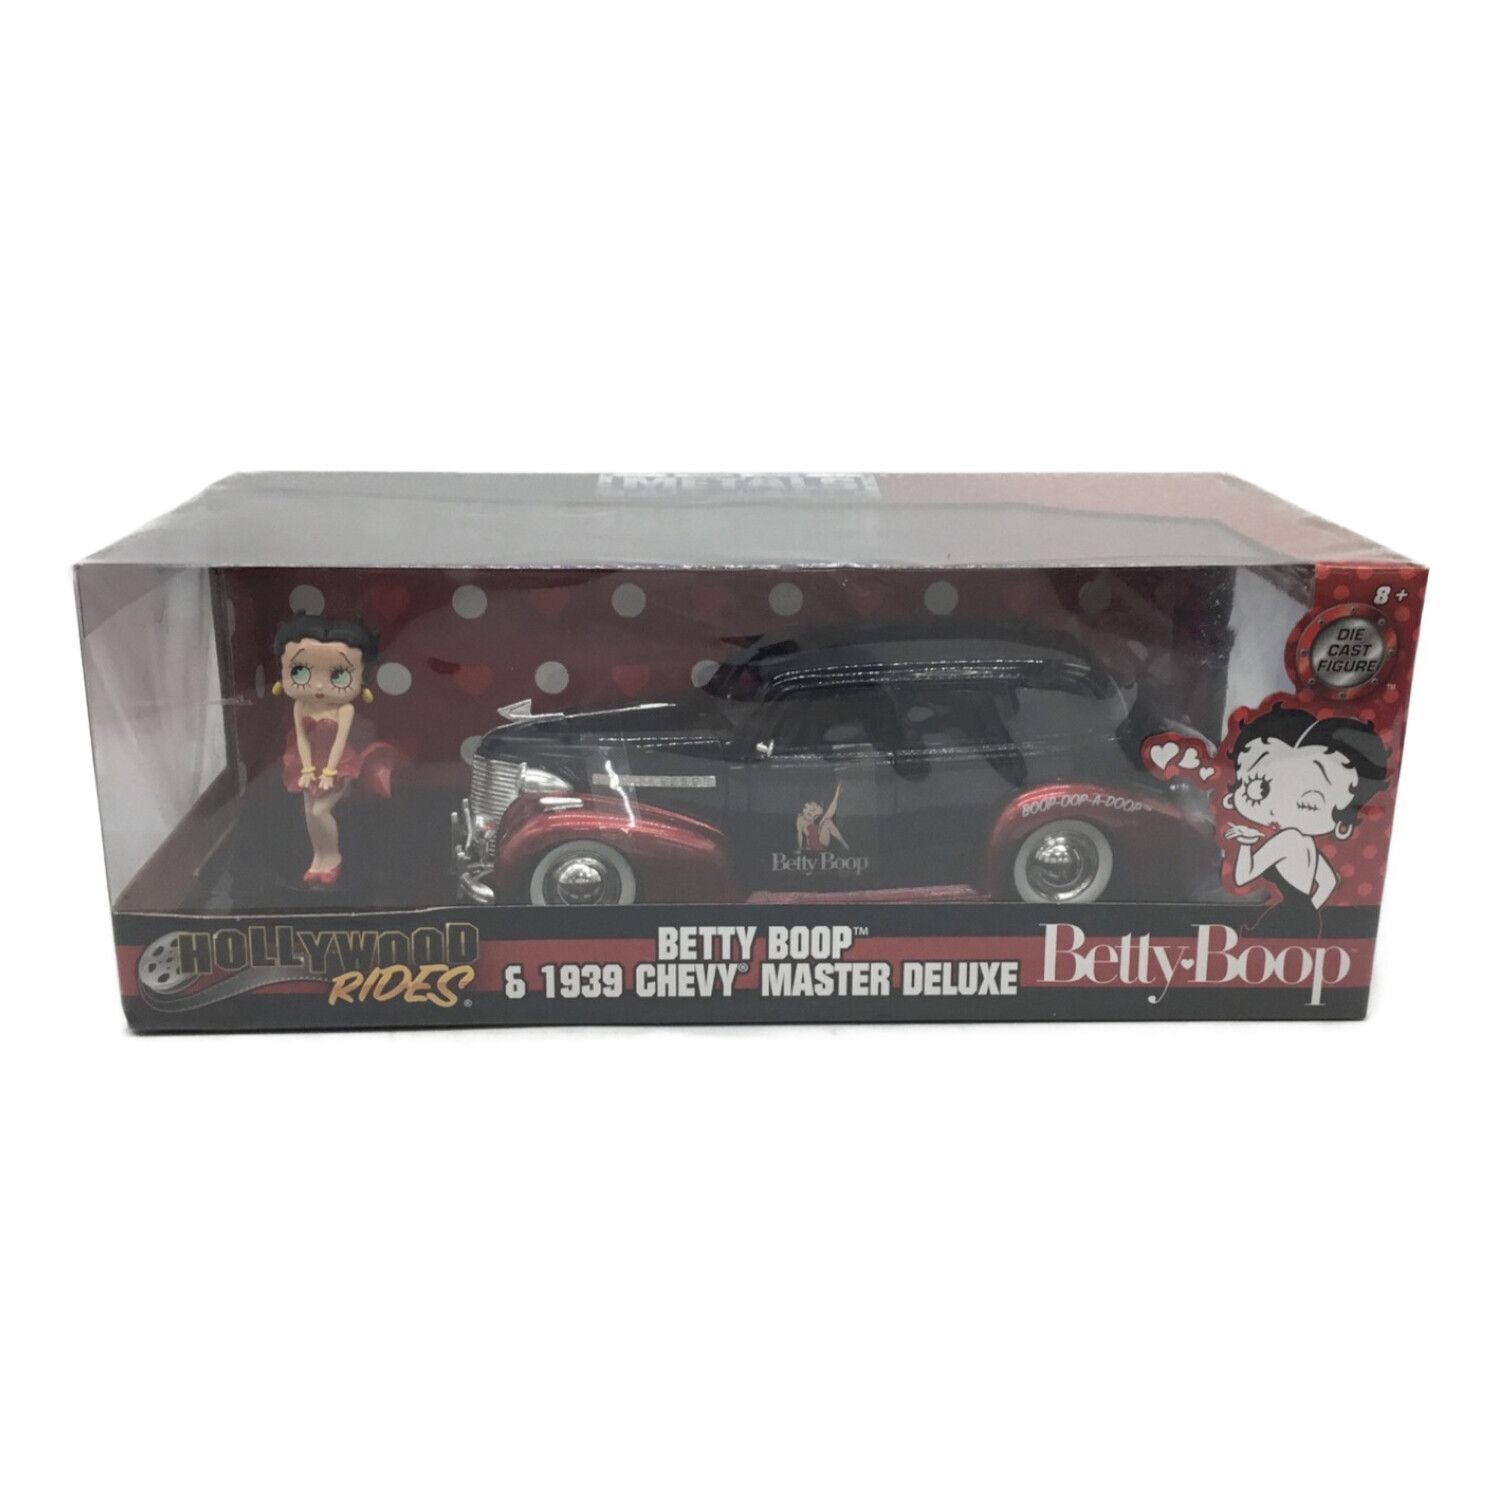 METALS DIE CAST Model Car 1:24 Hollywood Rides 1939 CHEVY MASTER DELUXE  W/BETTY BOOP